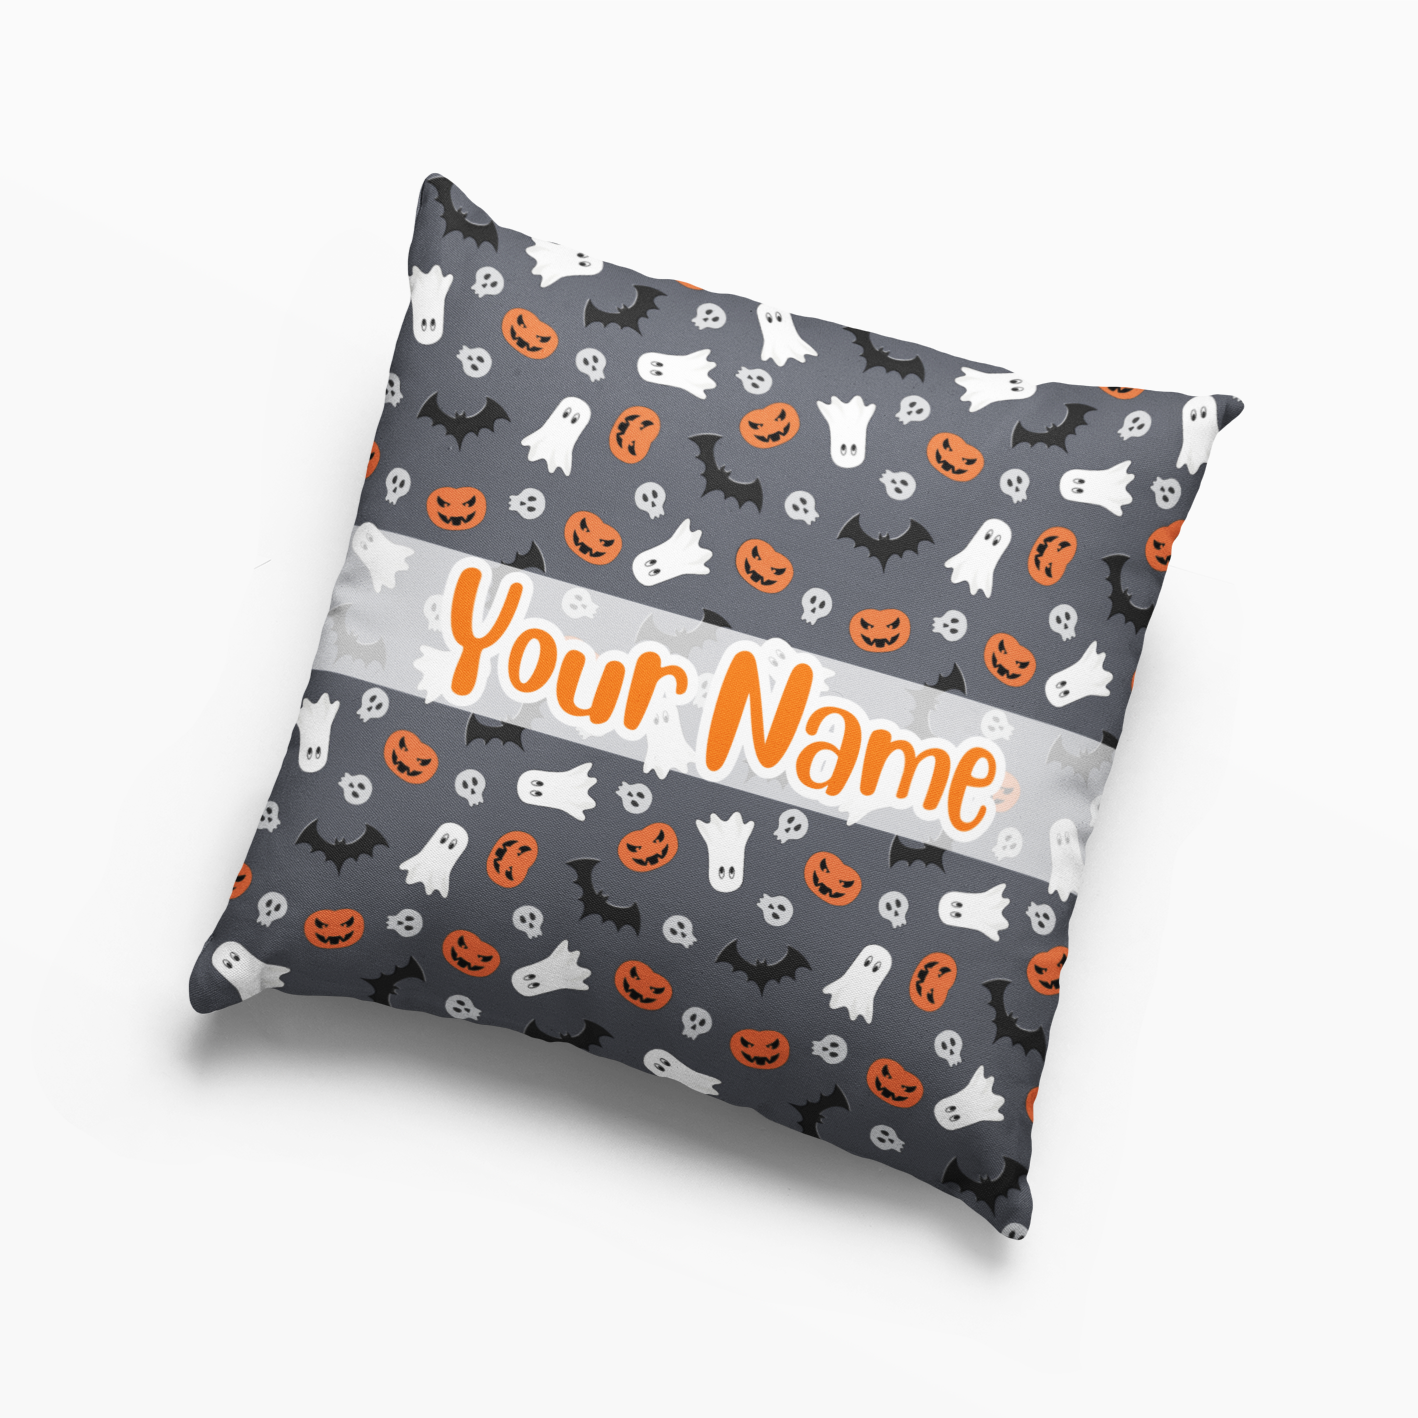 Funny Halloween Pillow personalized Pillow with Your name #8 Pillow Case